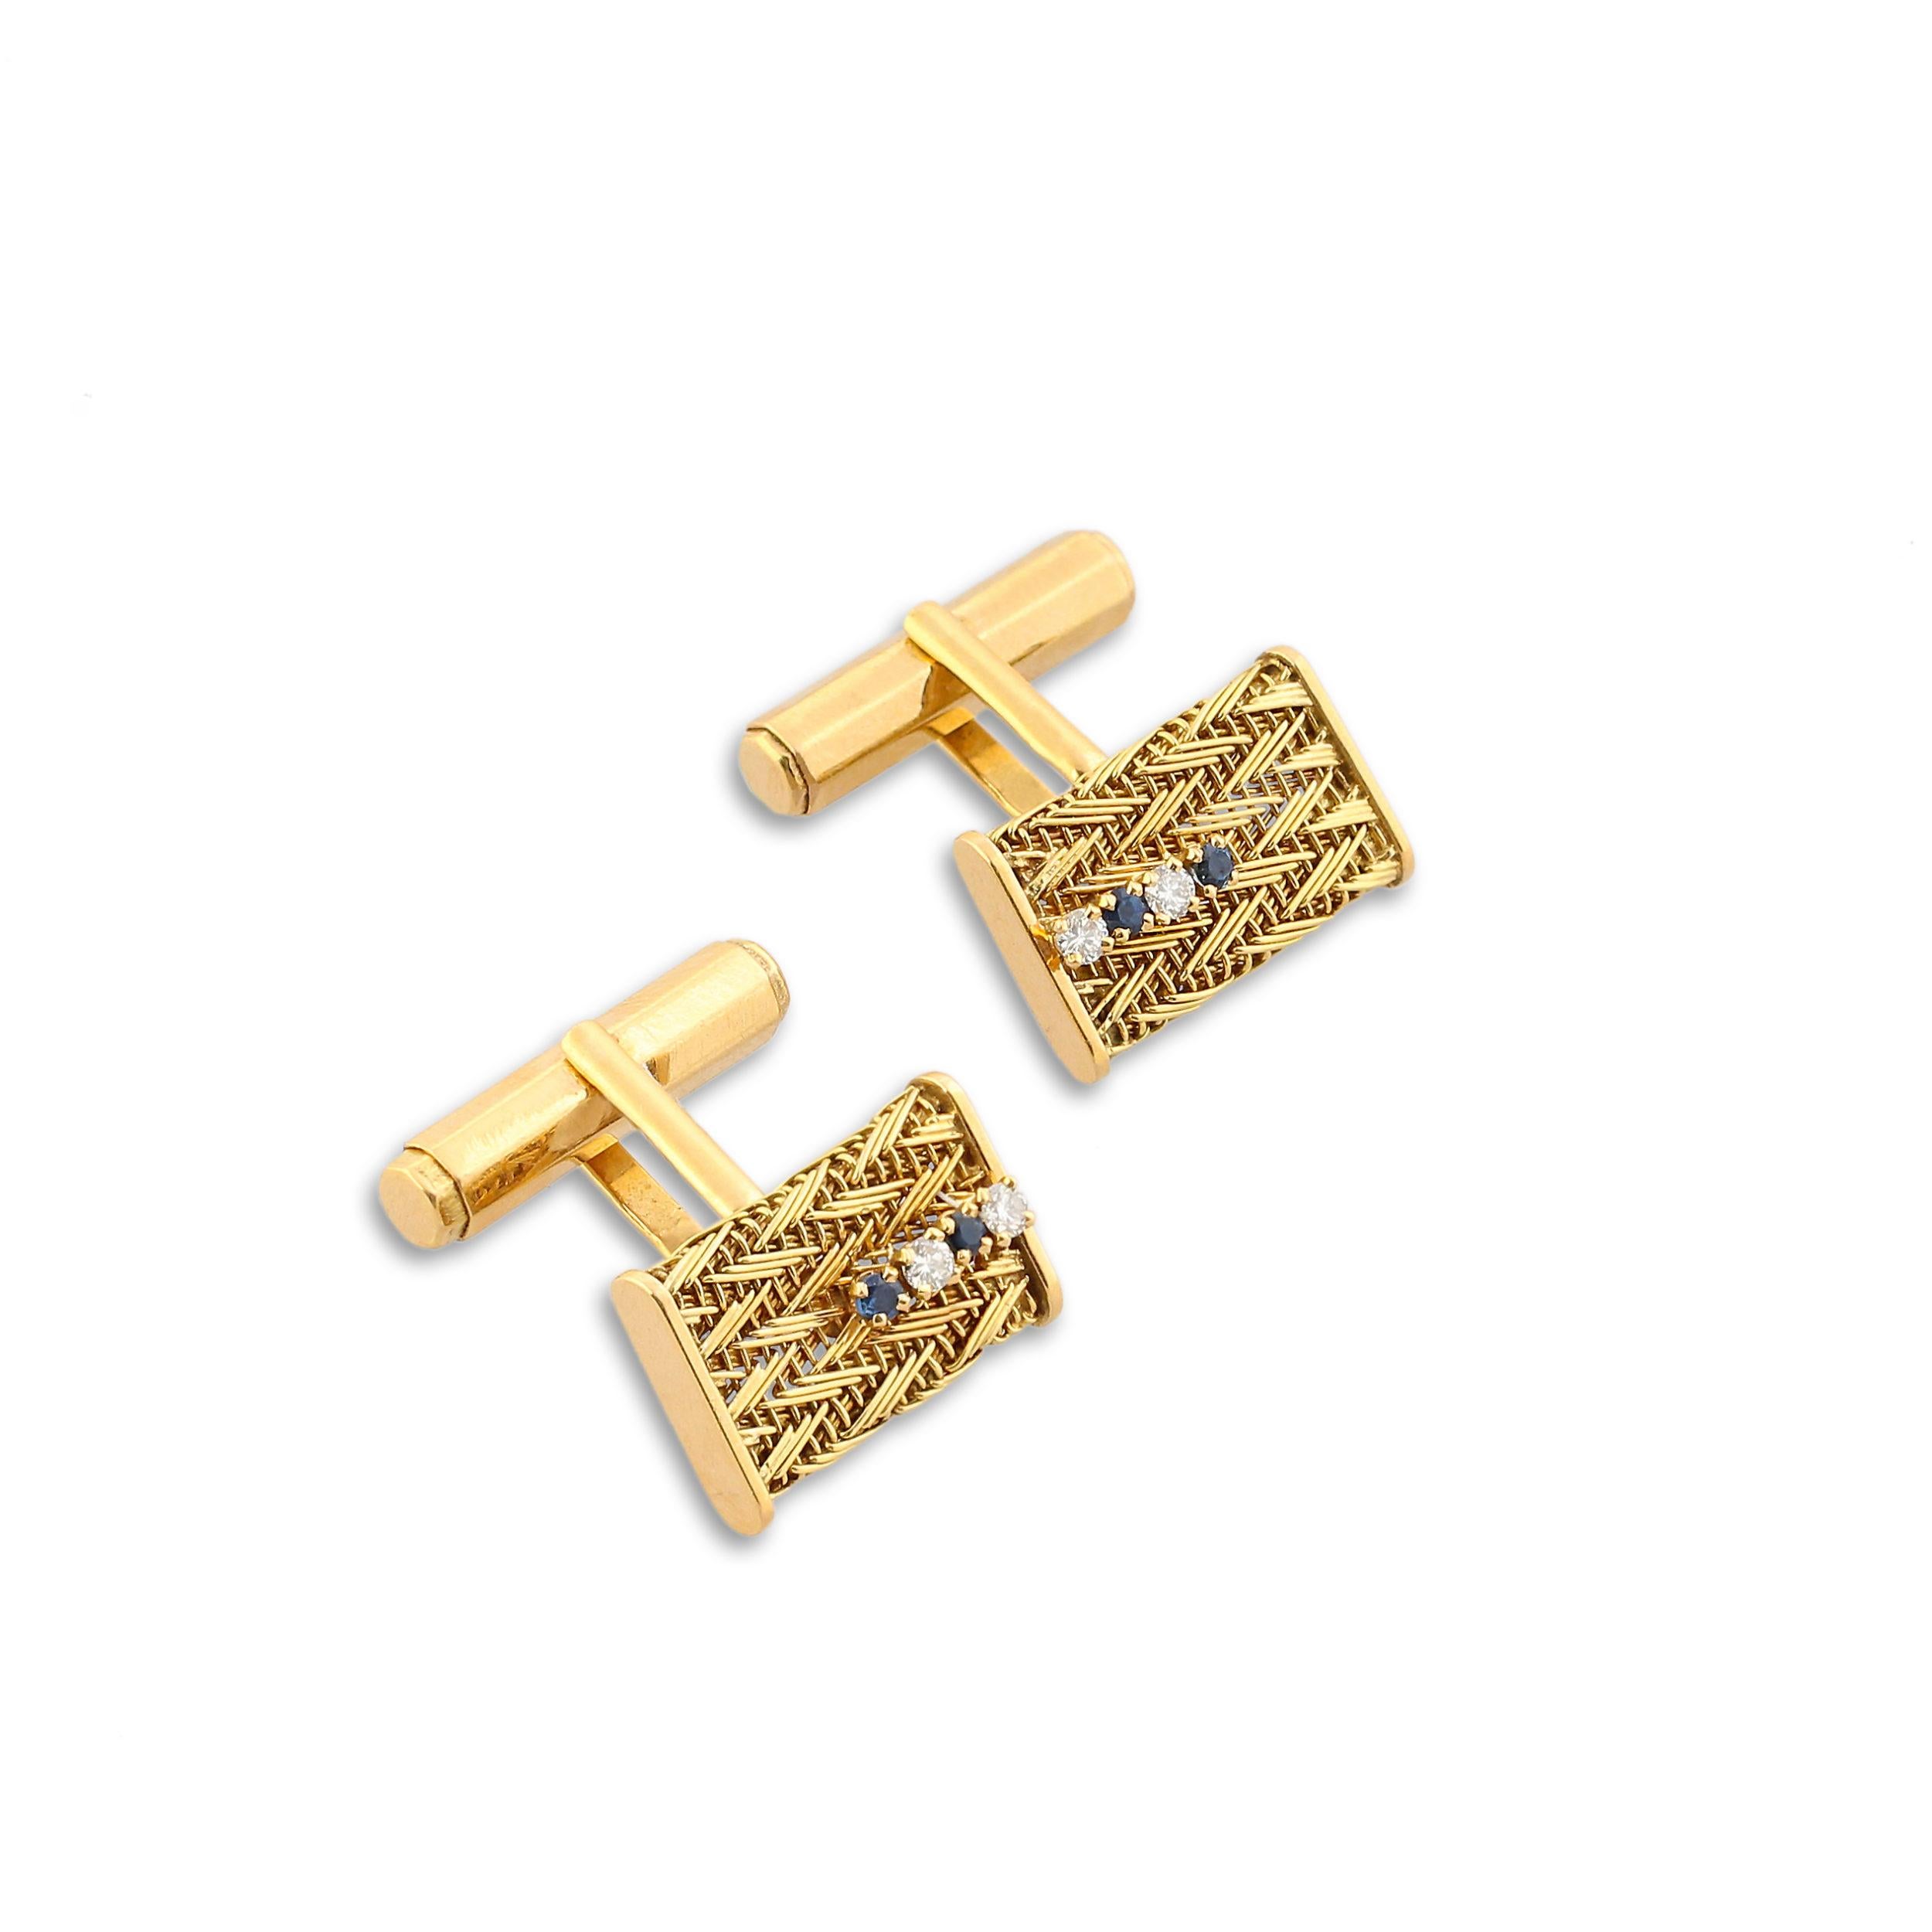 A pair of French yellow gold cufflinks in a mesh design set with a row of sapphire and diamonds. Size = 2cm x 2cm. Weight = 14.3gr. Circa 1950s.